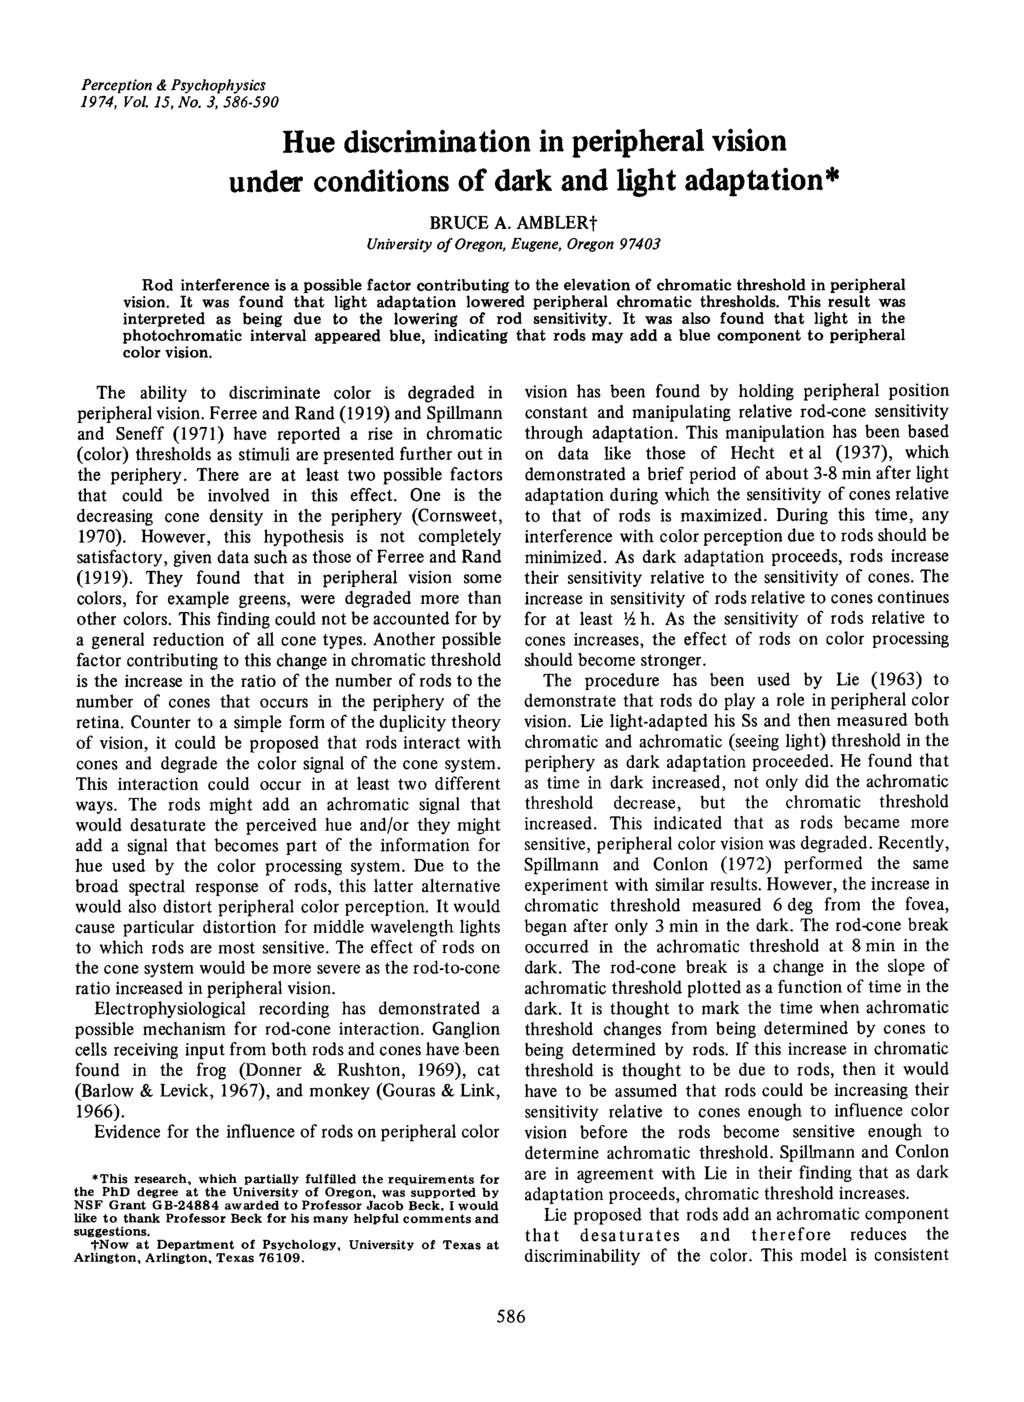 Perception & Psychophysics 1974, Vol. 15, No.3, 586-590 Hue discrimination in peripheral vision under conditions of dark and light adaptation* BRUCE A.